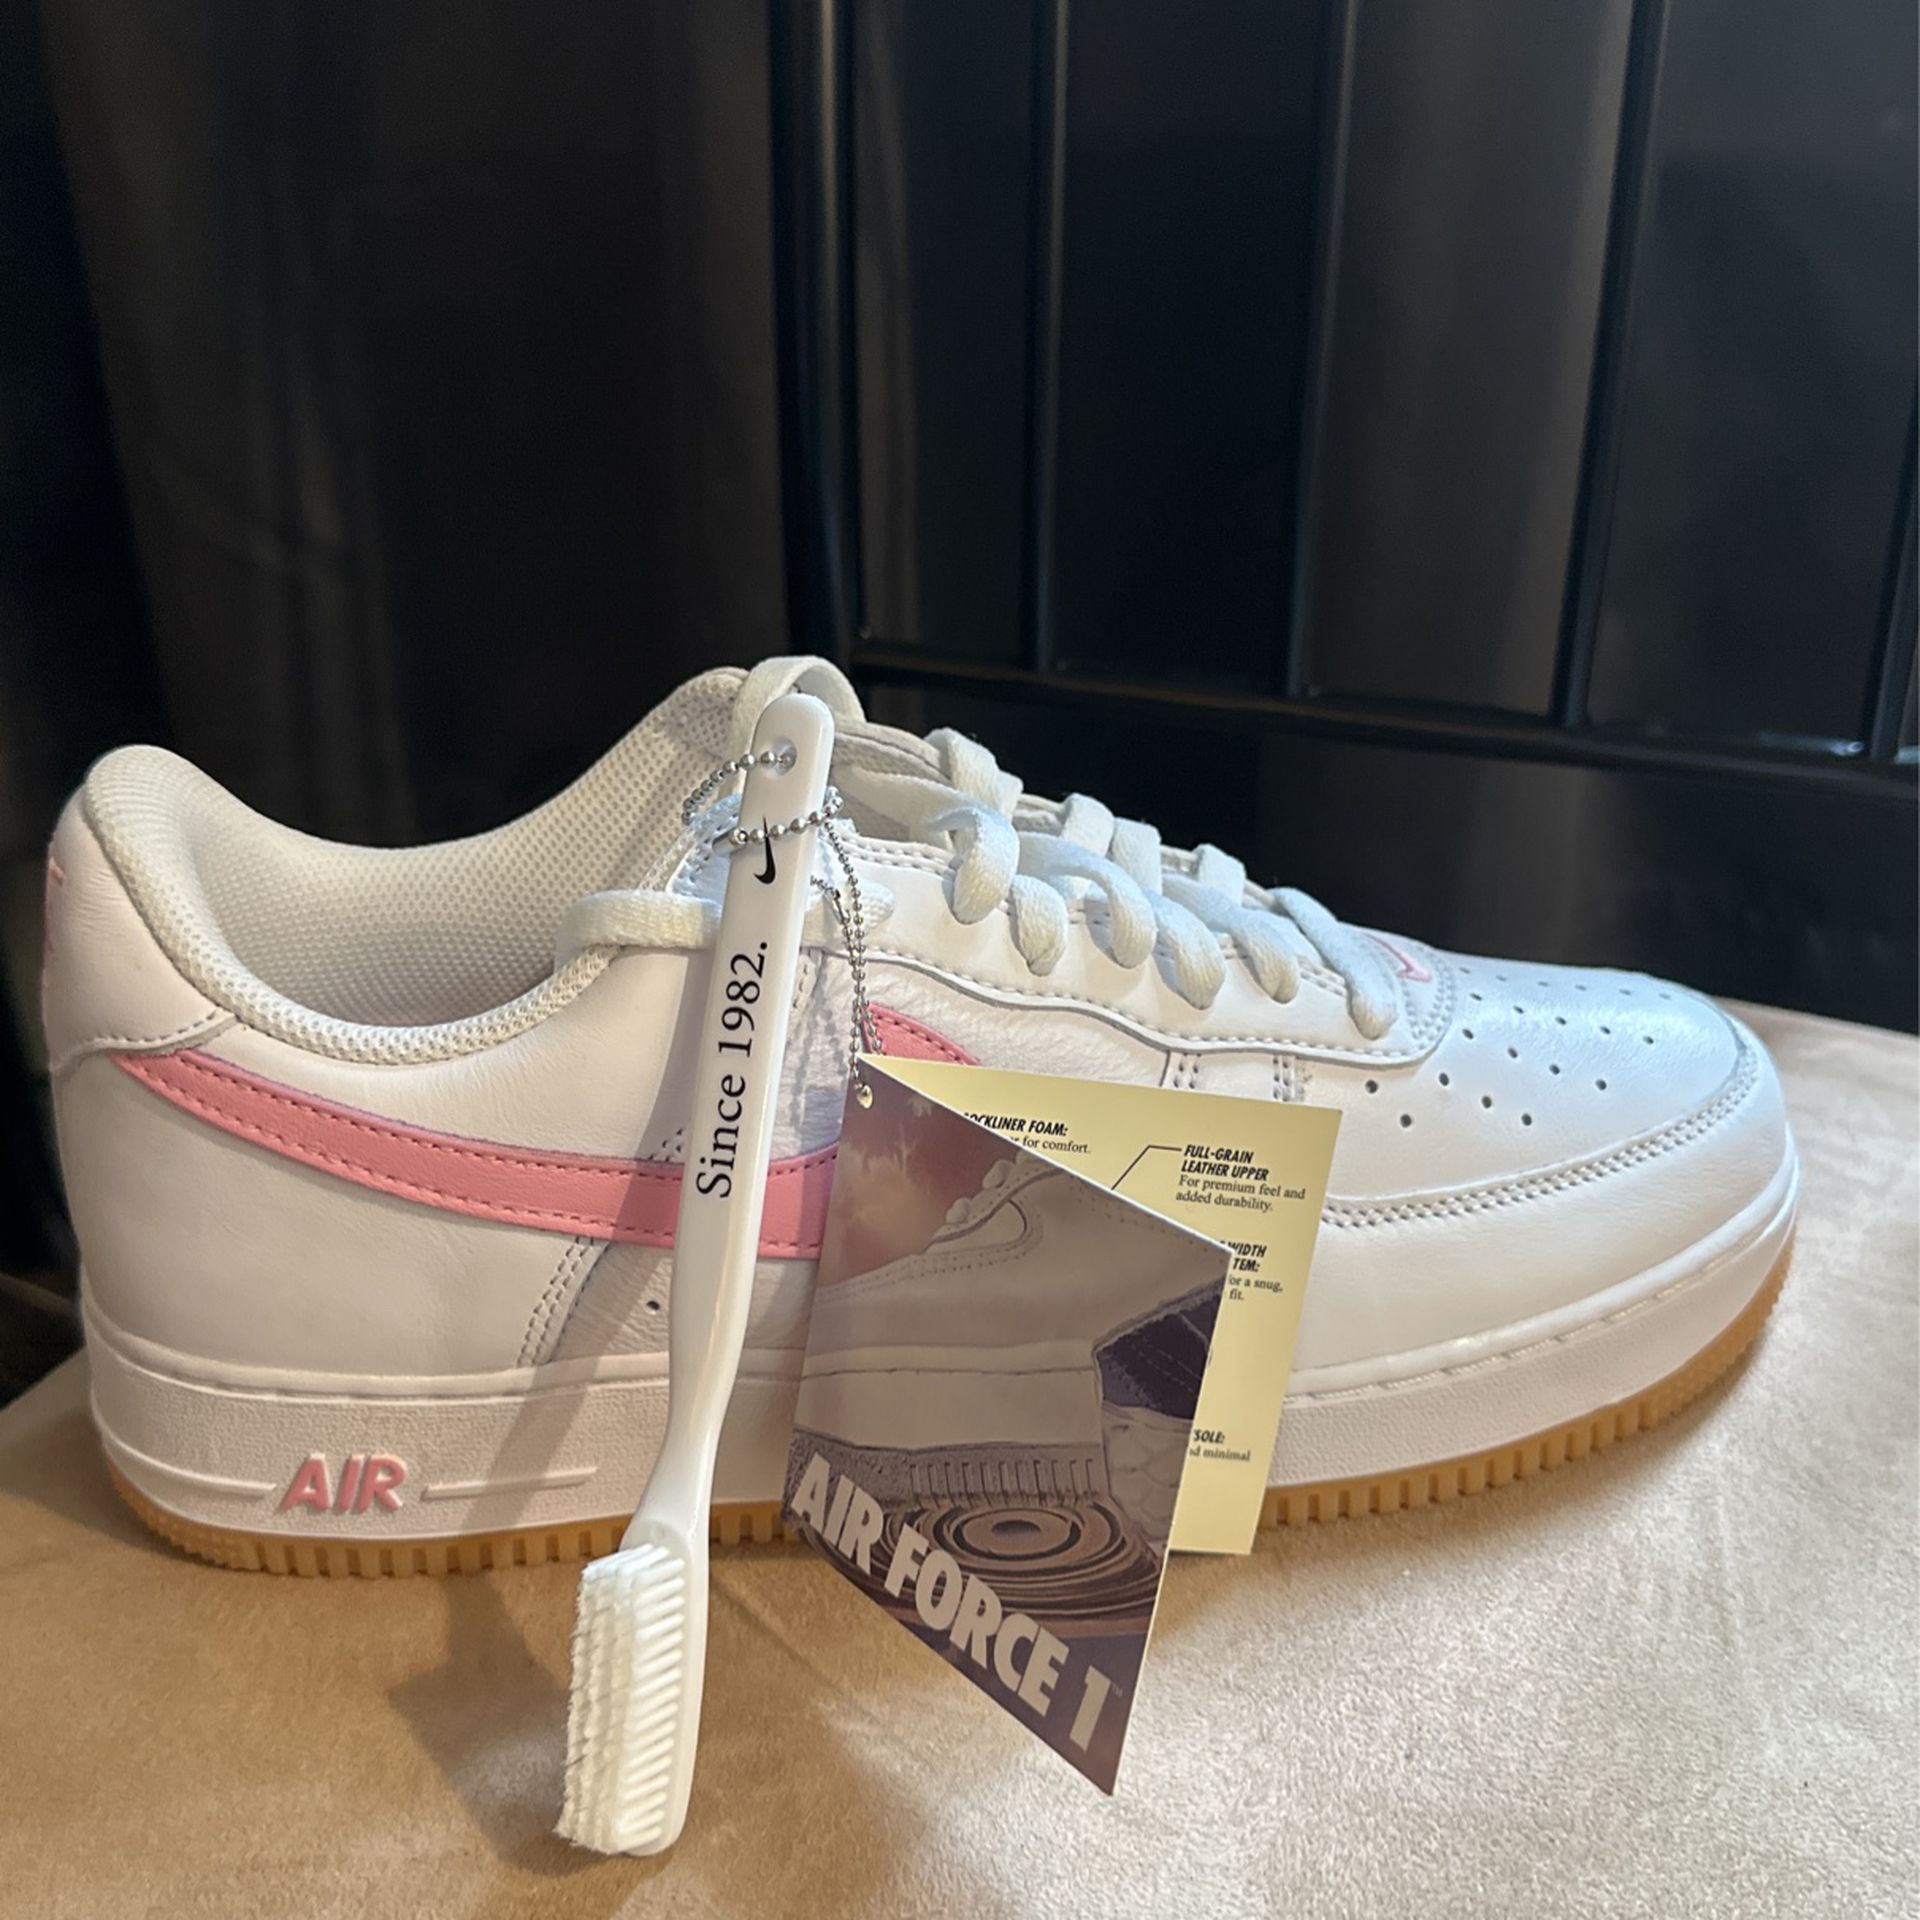 Nike Air Force One Anniversary Edition for Sale in New York, NY - OfferUp